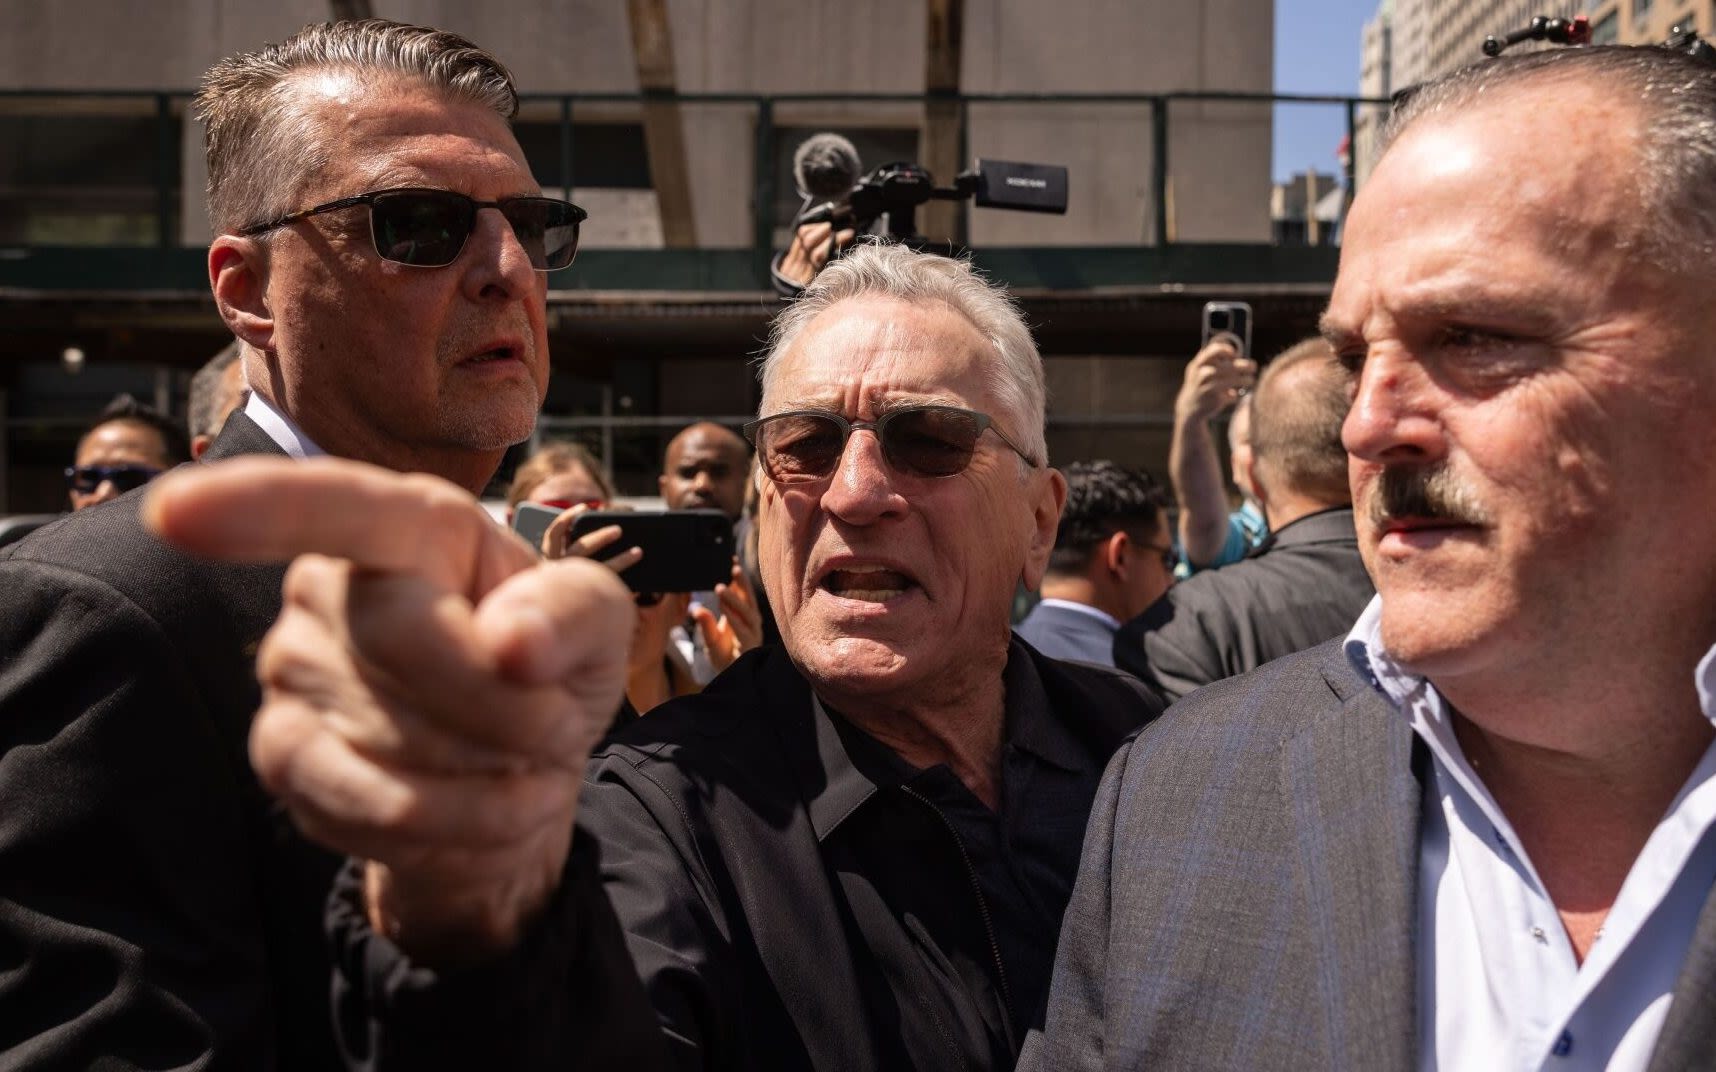 Trump is a ‘clown’ who will become ‘dictator for life’, says De Niro outside court